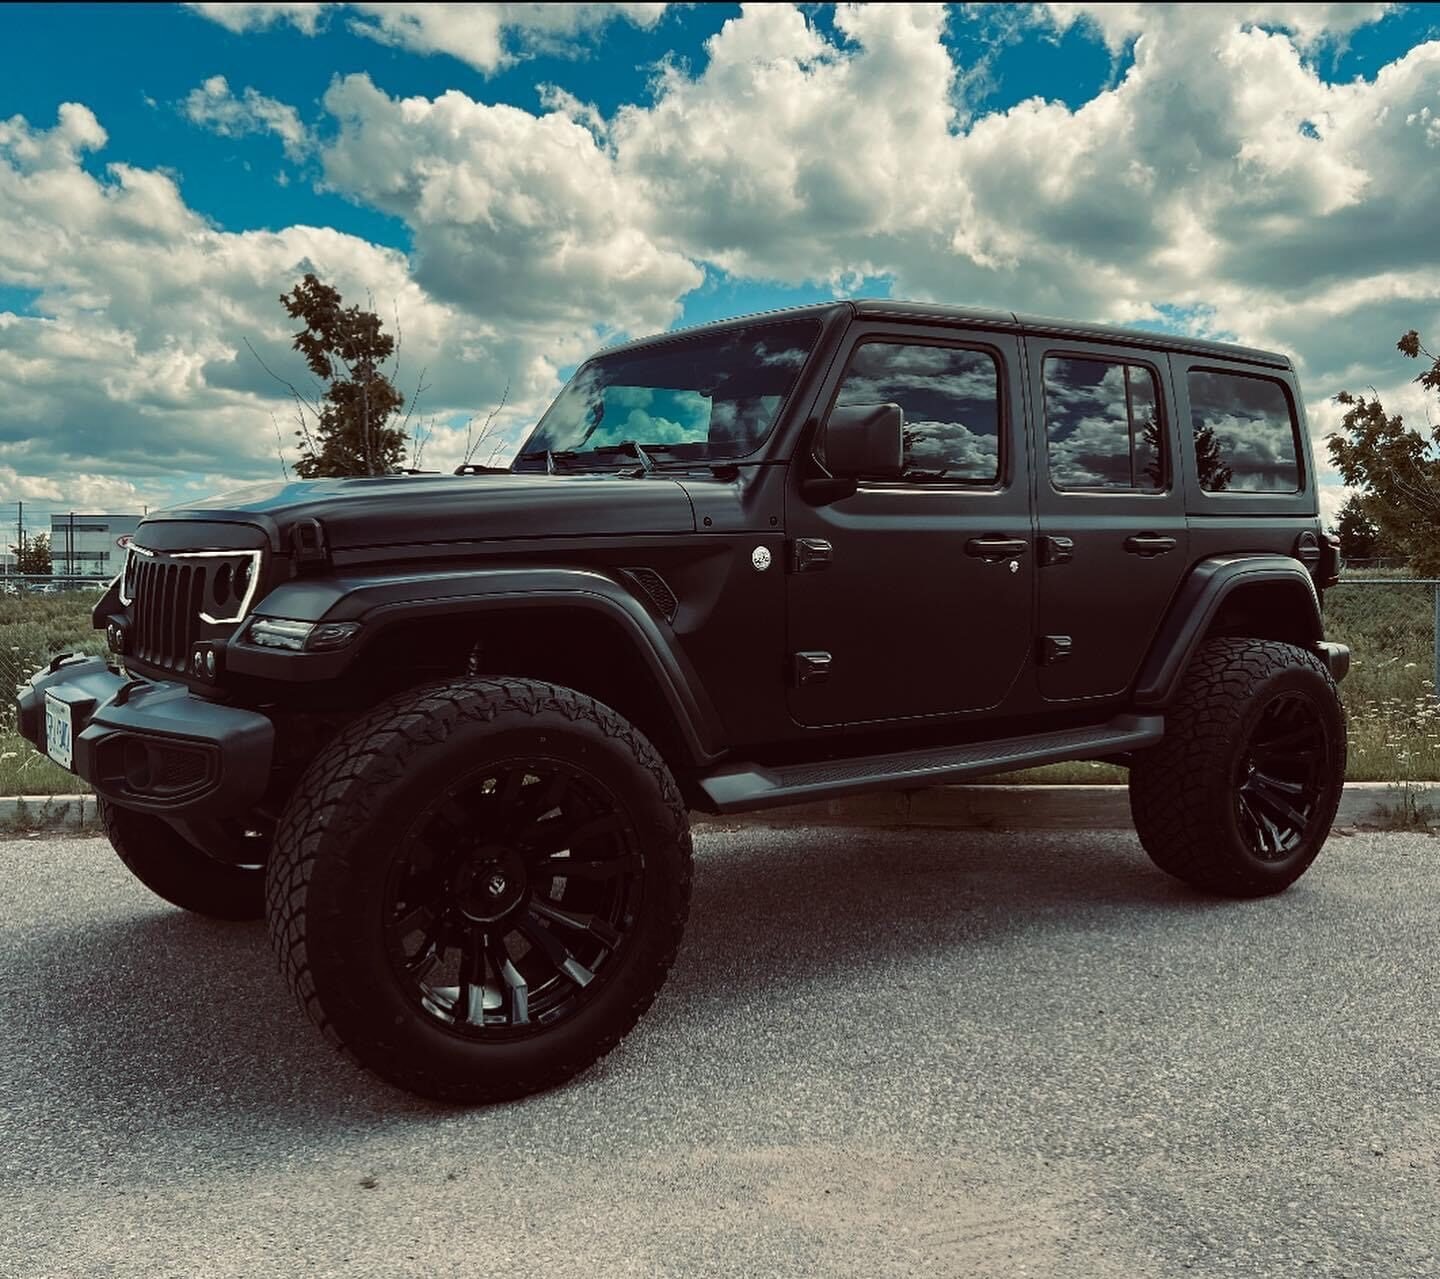 satin black 3m car wrapping on lifted jeep.